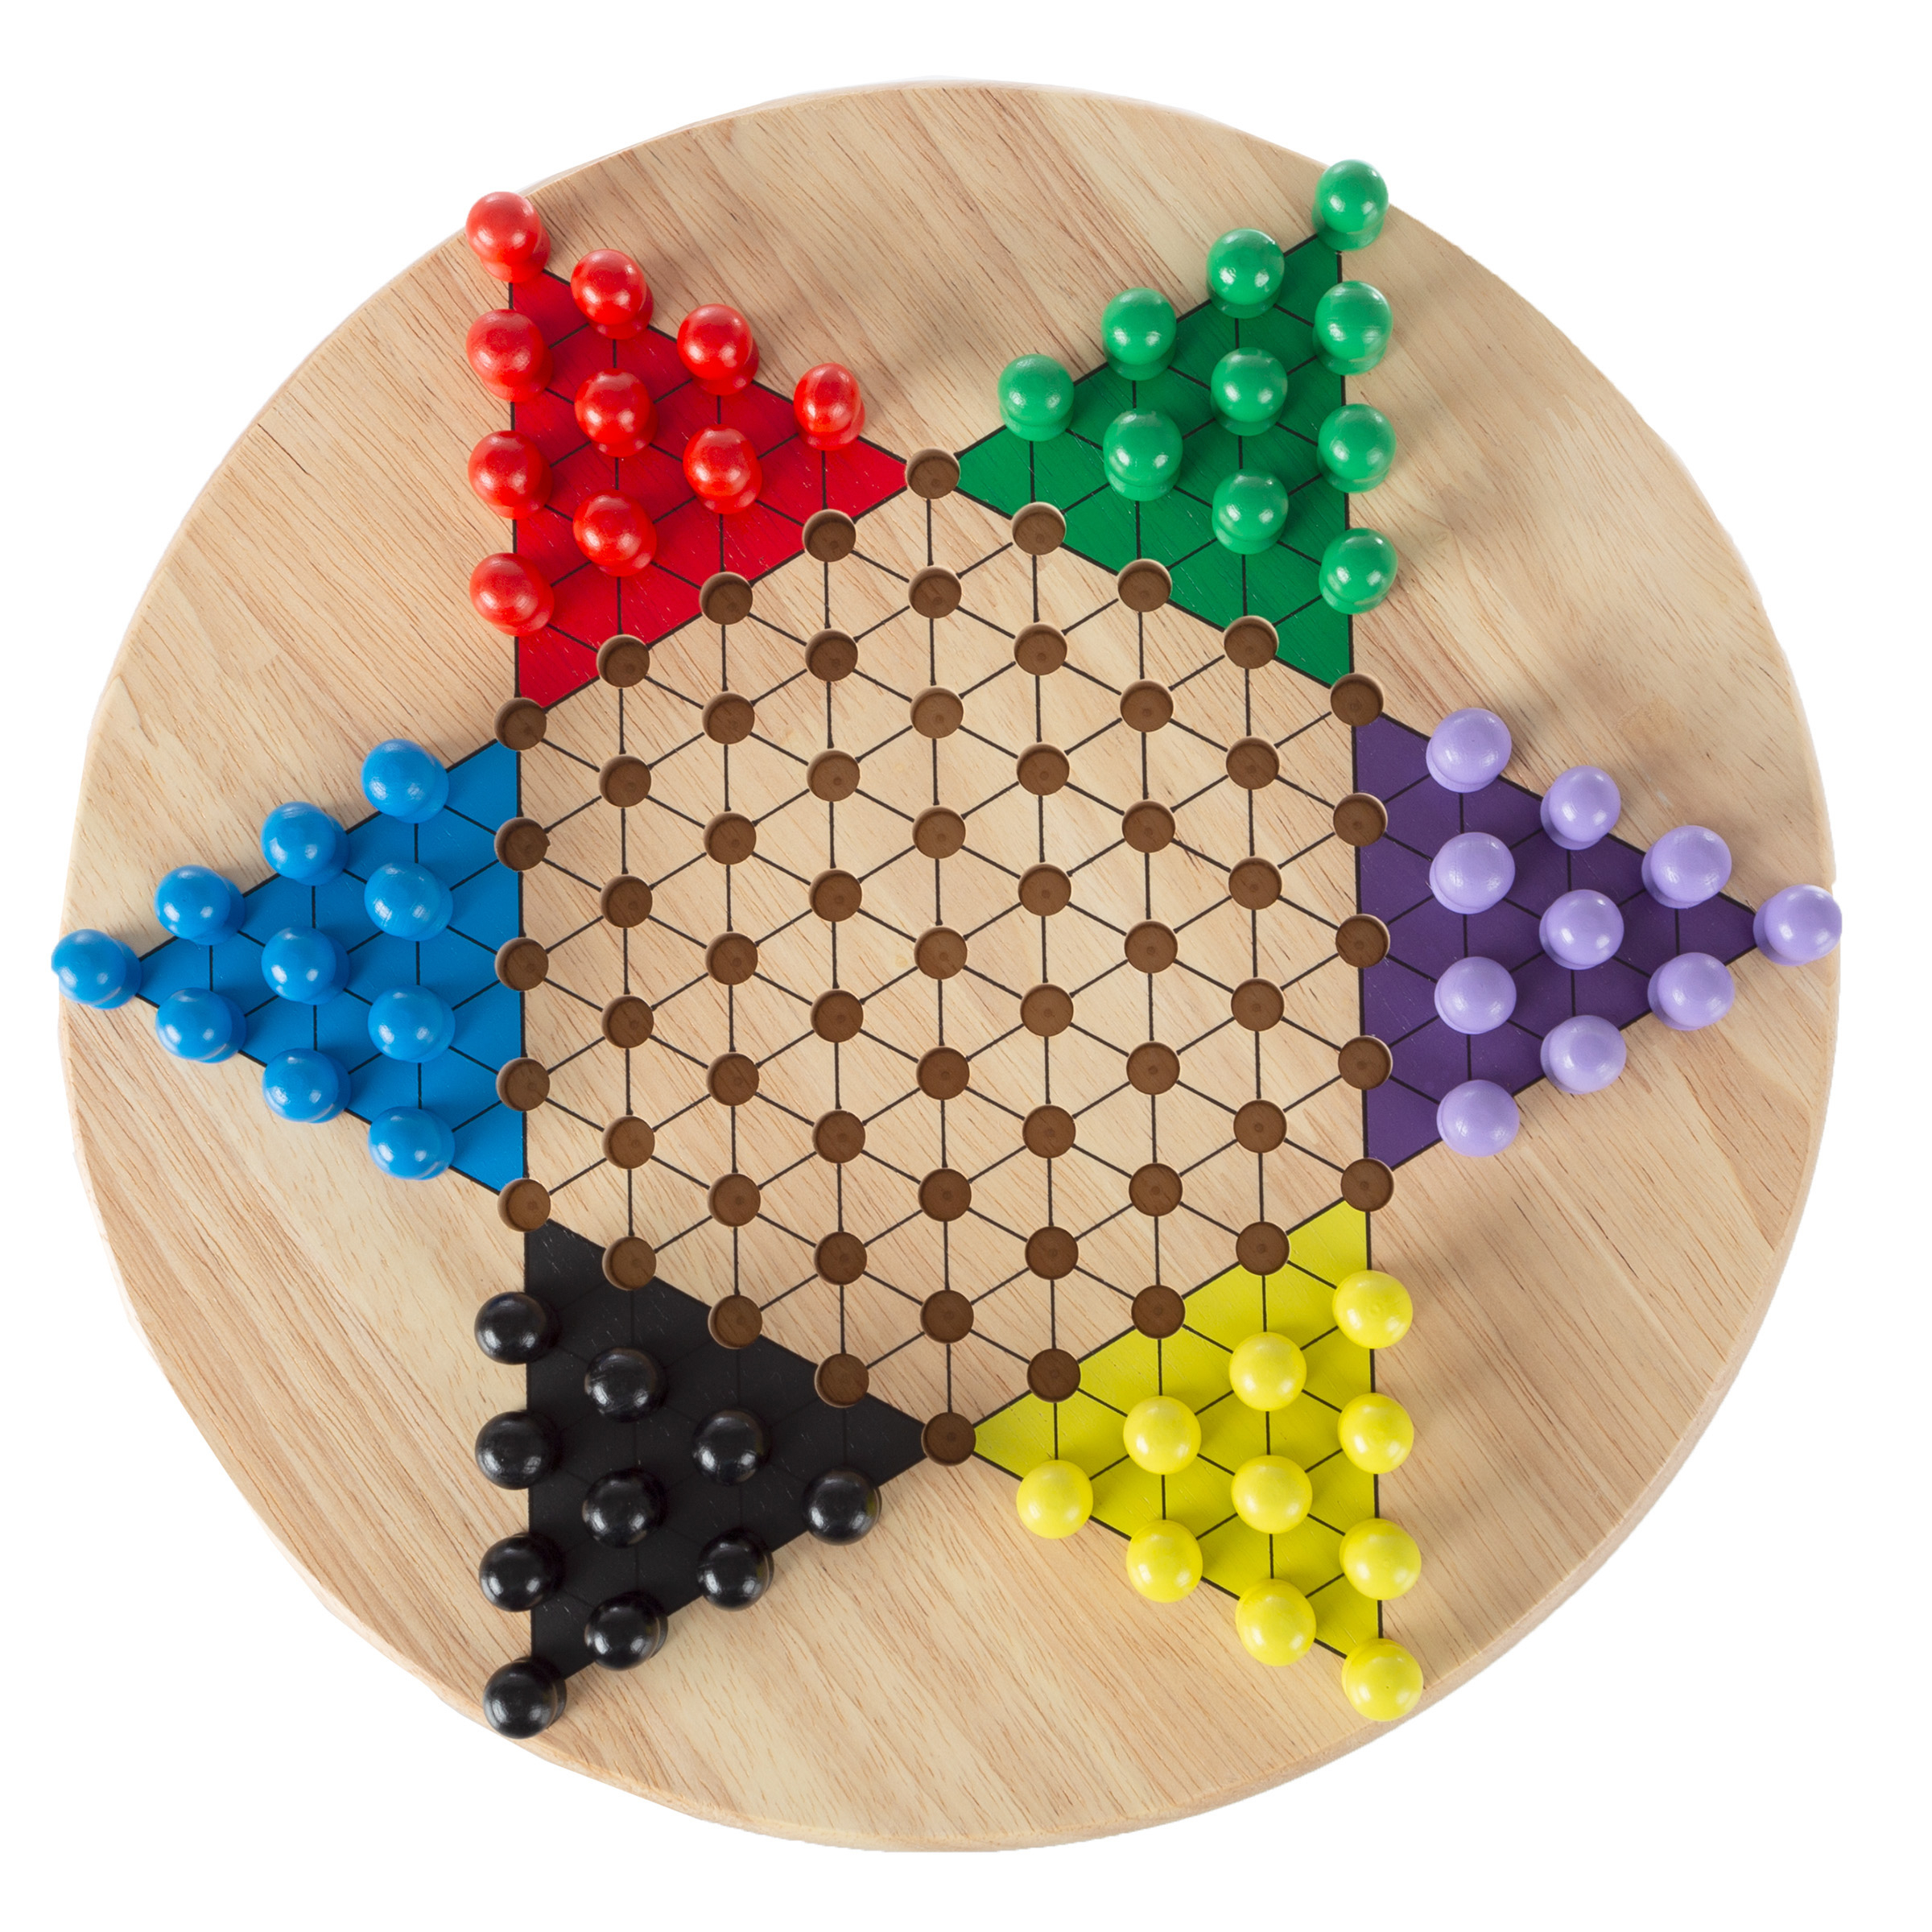 Chinese Checkers 11 Inch Wooden Game Board Set For Family Fun Night For Kids And Adults